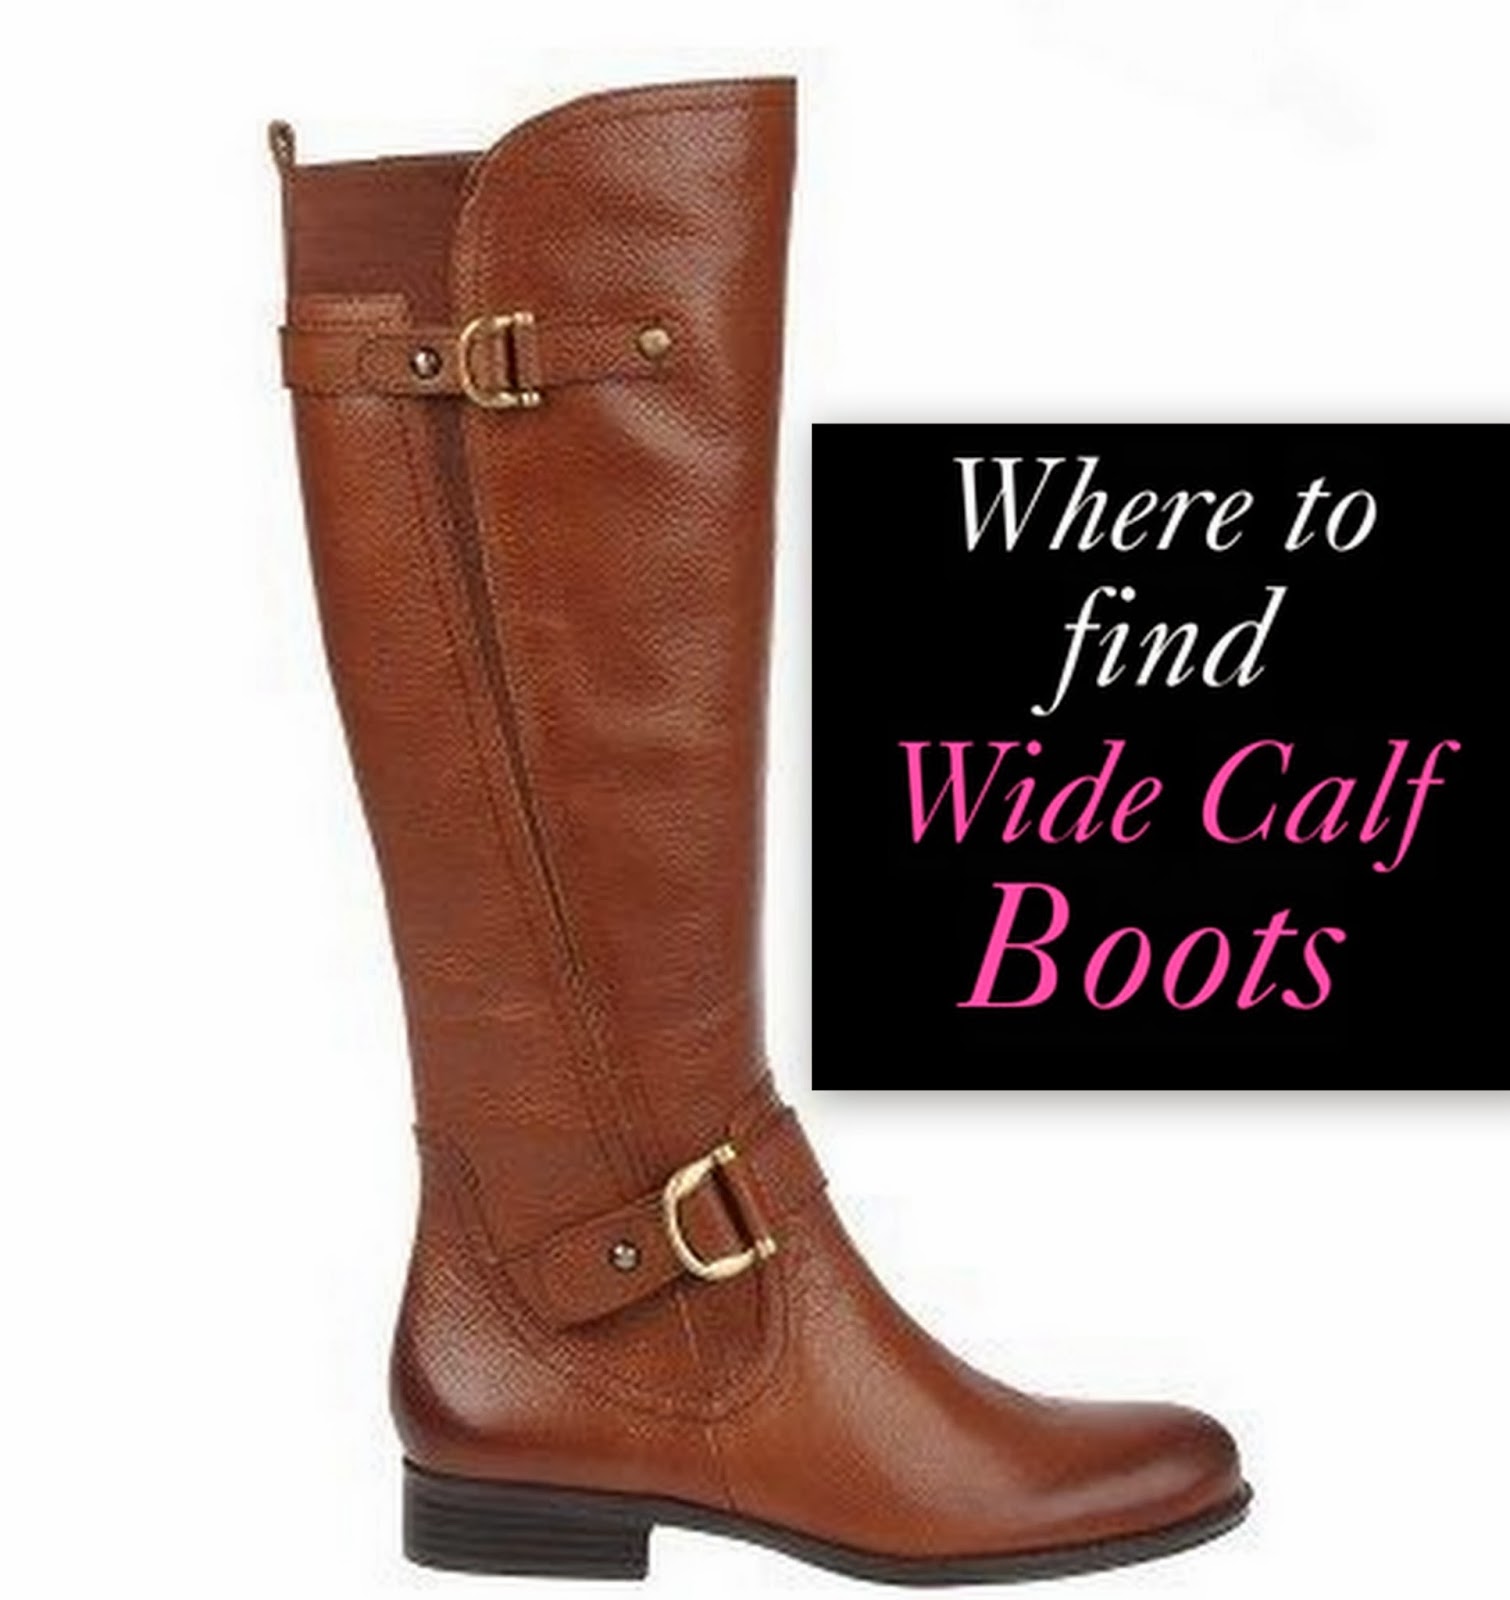 TheStyleSupreme: Where to Shop for Wide Calf Boots